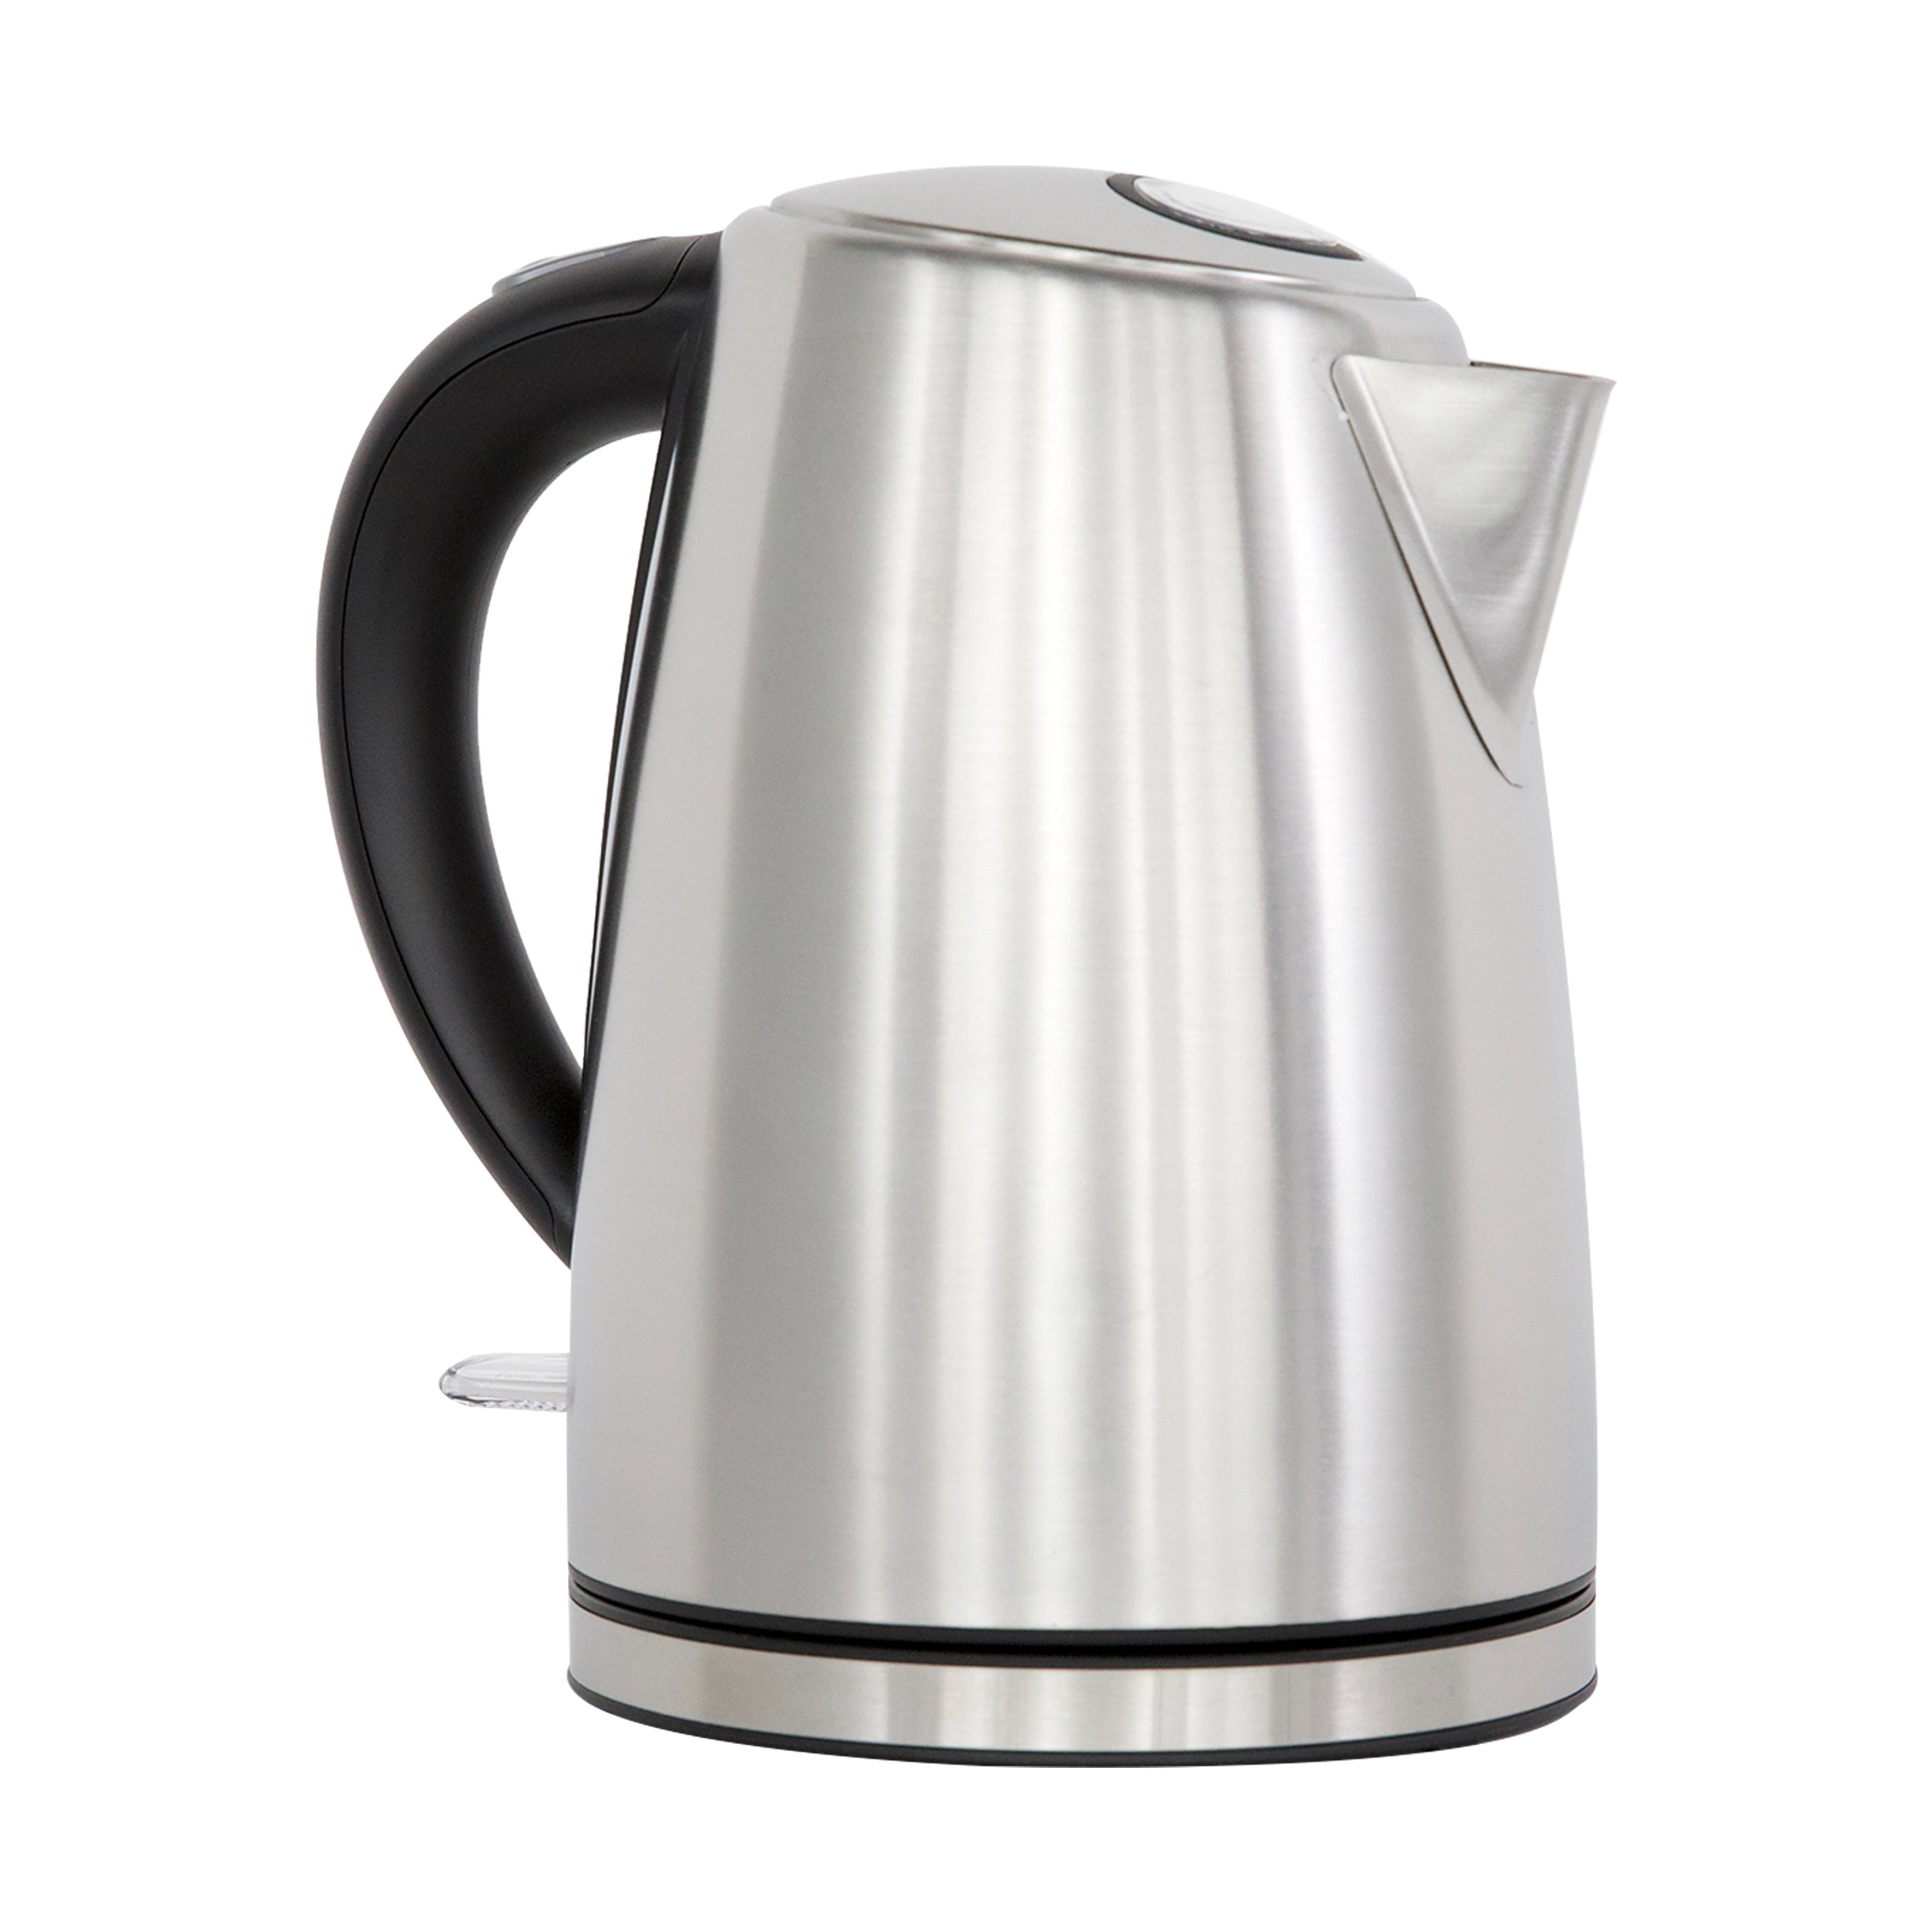 In Stock free sample Kitchen appliance 1.7L electric kettle for